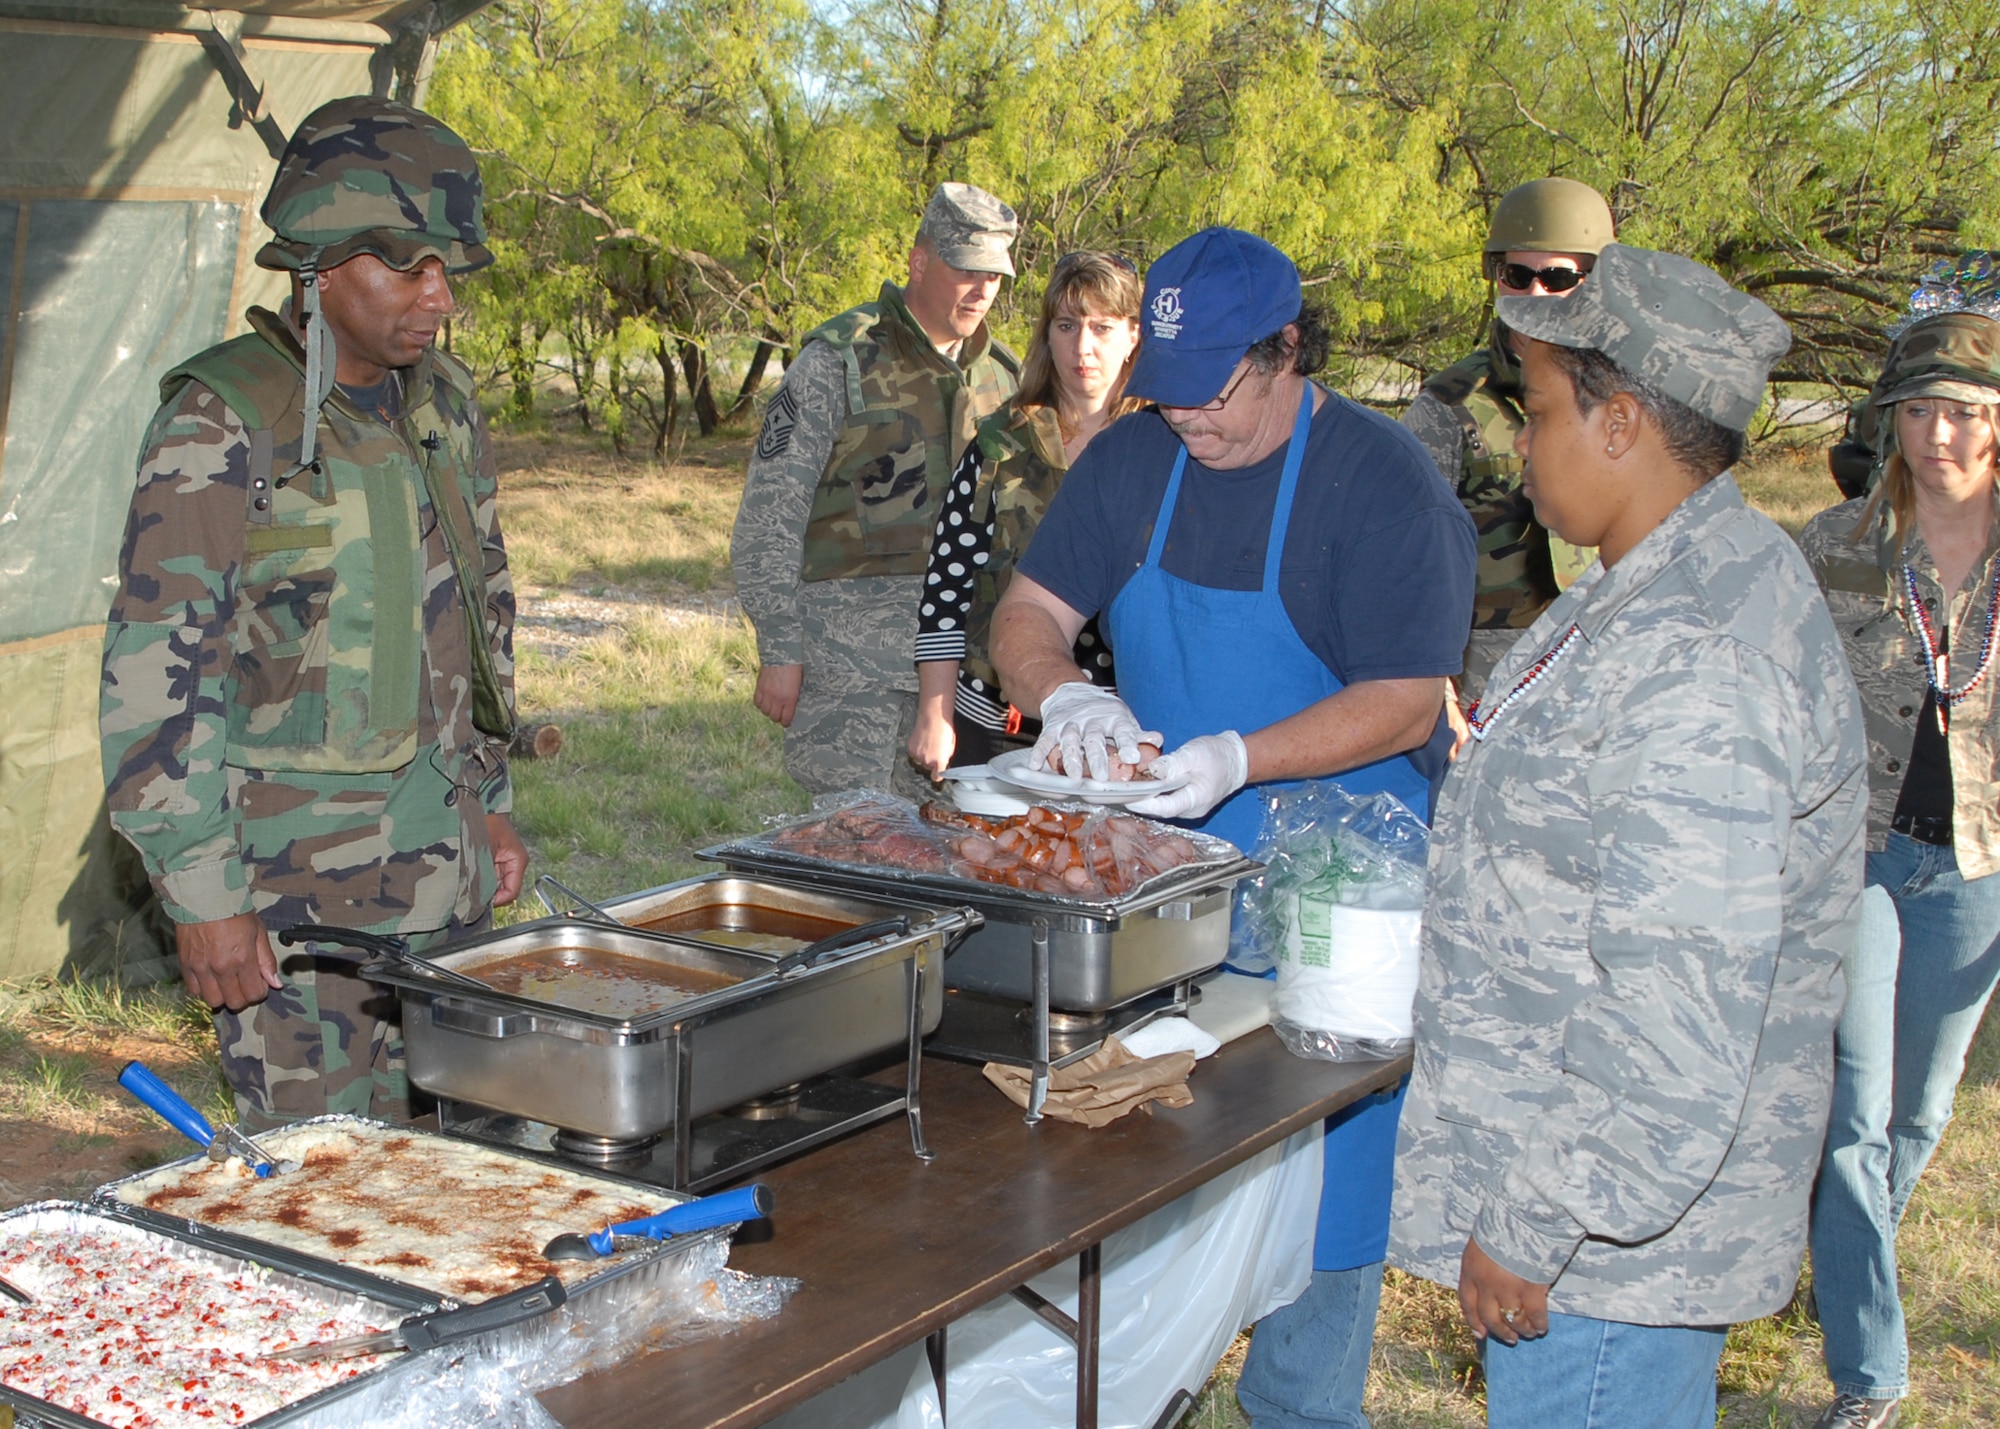 Col. Tony Pounds, 782nd Training Group commander, serves a plate of chow at the Combat Dining Out April 18 at the Medical Readiness Site. Members of the 782nd Training Group hydrate during the Combat Dinning Out. More than 100 permanent party members attended including commanders from 782nd TRG detachments at Fort Leonard Wood, Mo., Naval Construction Battalion Center Gulfport in Miss., Eglin Air Force Base, Fla., and Hill AFB, Utah. Lt. Col. Joseph Turk, deputy commander of the 782nd TRG, was the guest speaker at the event and was recognized with a plaque presented by ColonelPounds.  The purpose of the event was to build camaraderie and unit morale while fostering joint service operations within the 782nd TRG and also the Air Force. 